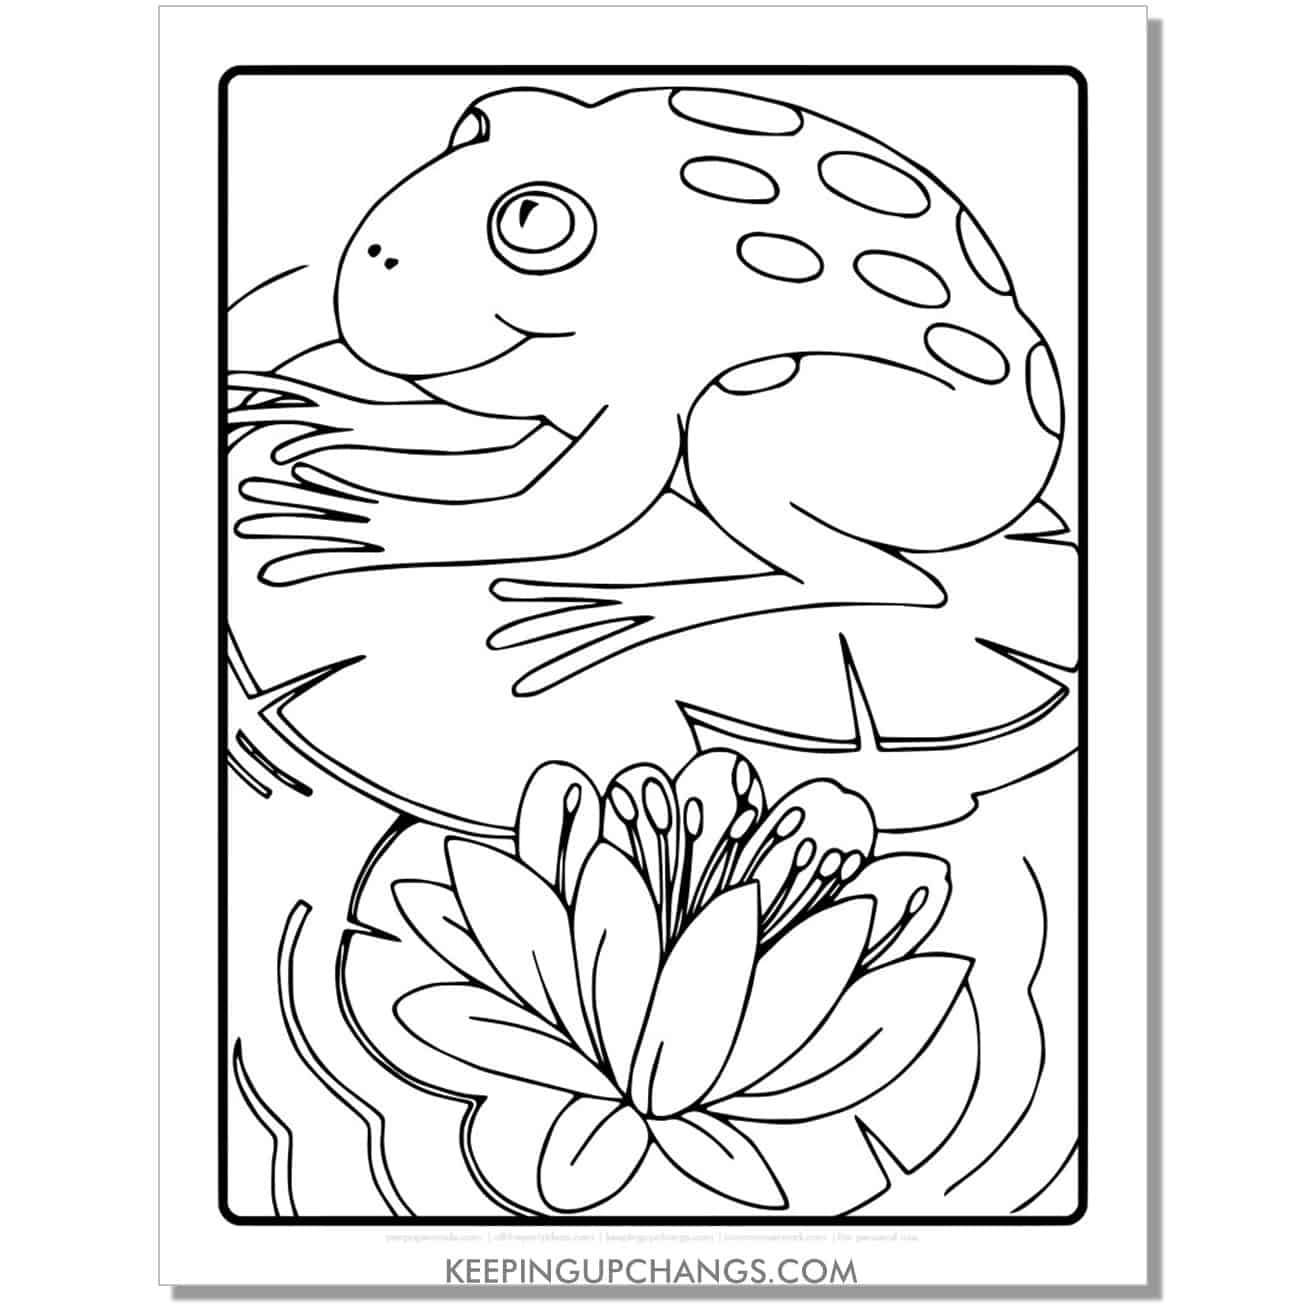 free frog illustration coloring page, sheet with lotus, lilypad.